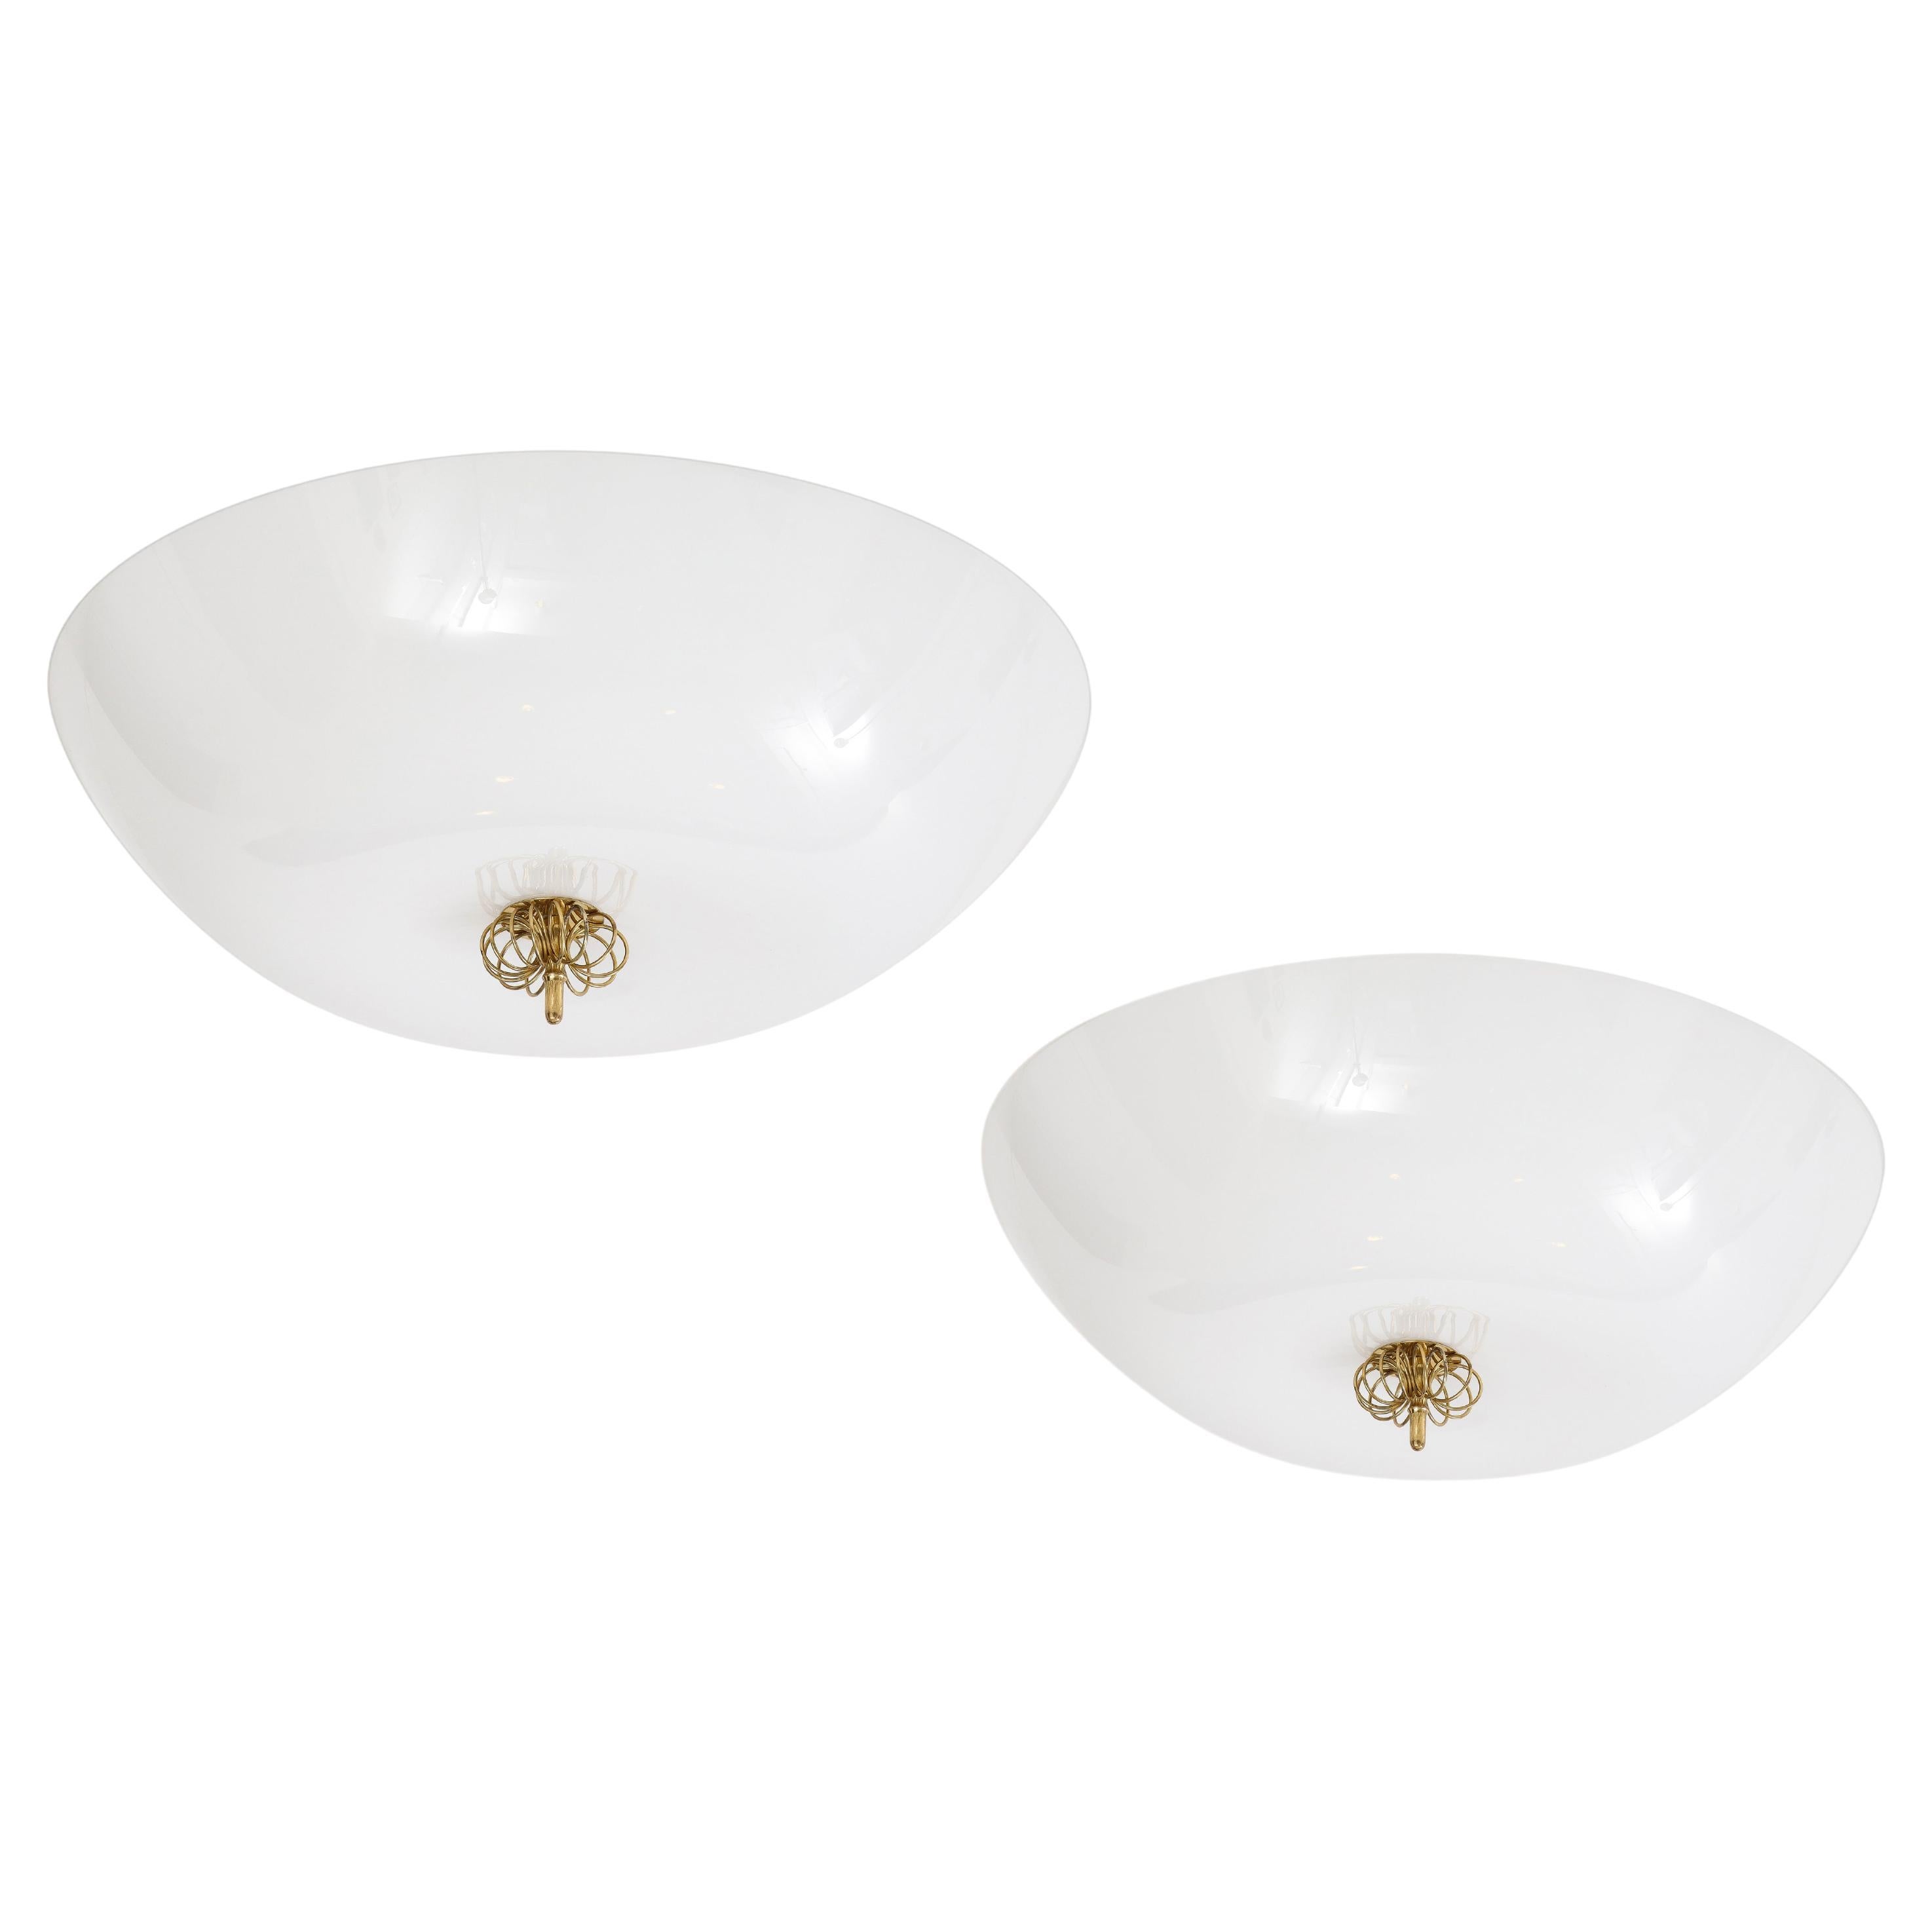 Paavo Tynell Rare Flush Mount Ceiling Lights Model 2093, Finland, 1950s For Sale